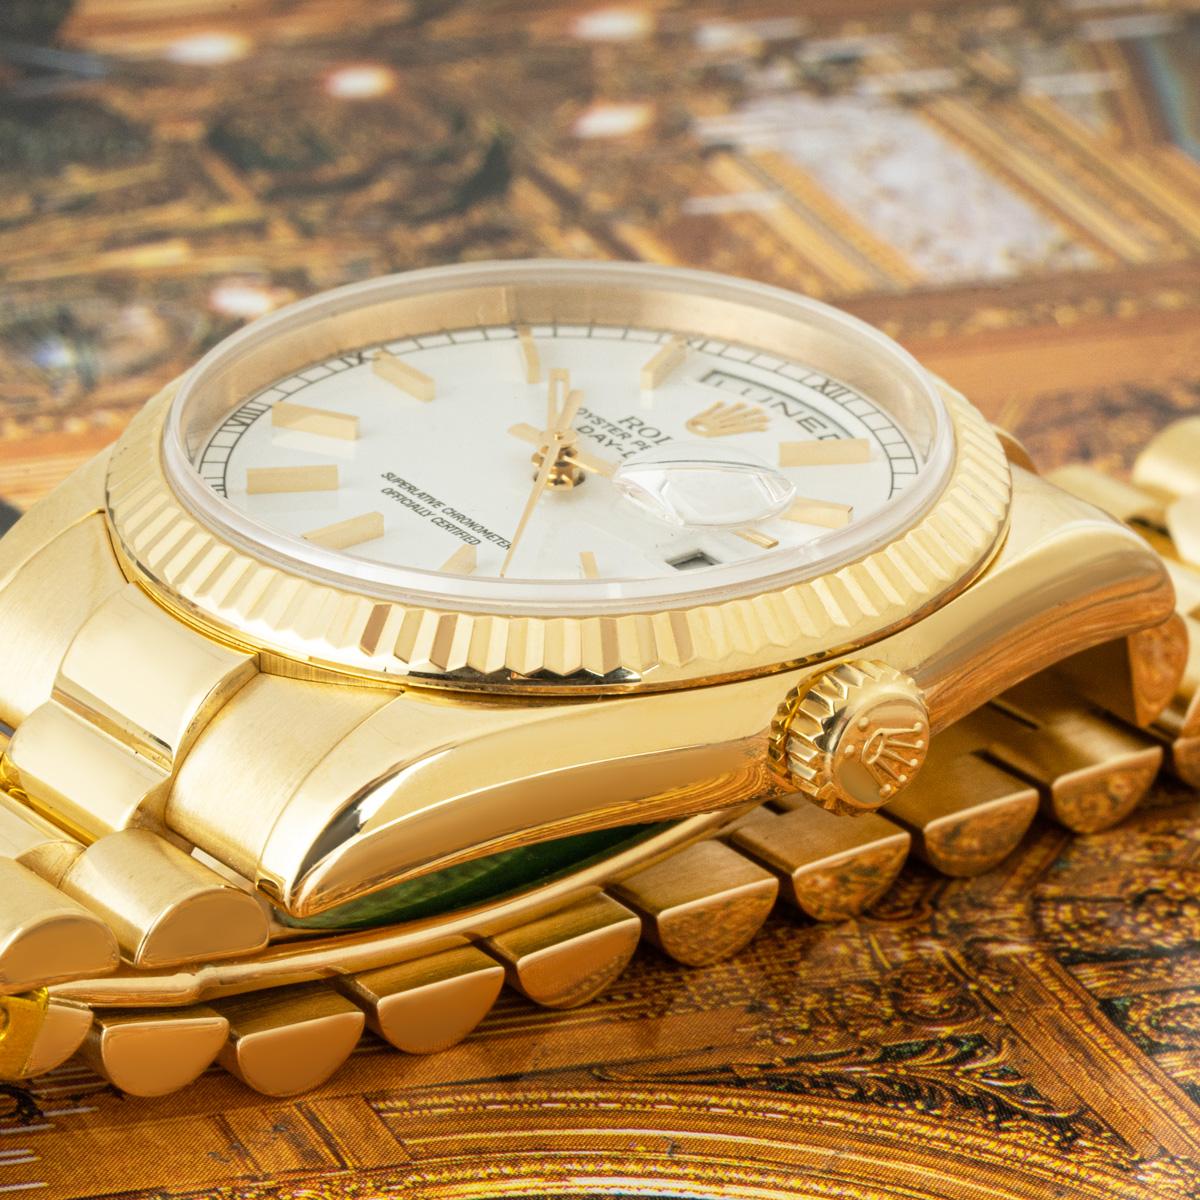 A yellow gold 36mm Day-Date by Rolex. Featuring a white dial with applied hour markers as well as roman numerals on the outer circumference of the dial and a yellow gold fluted bezel. The president bracelet is set with a concealed Crownclasp. Fitted